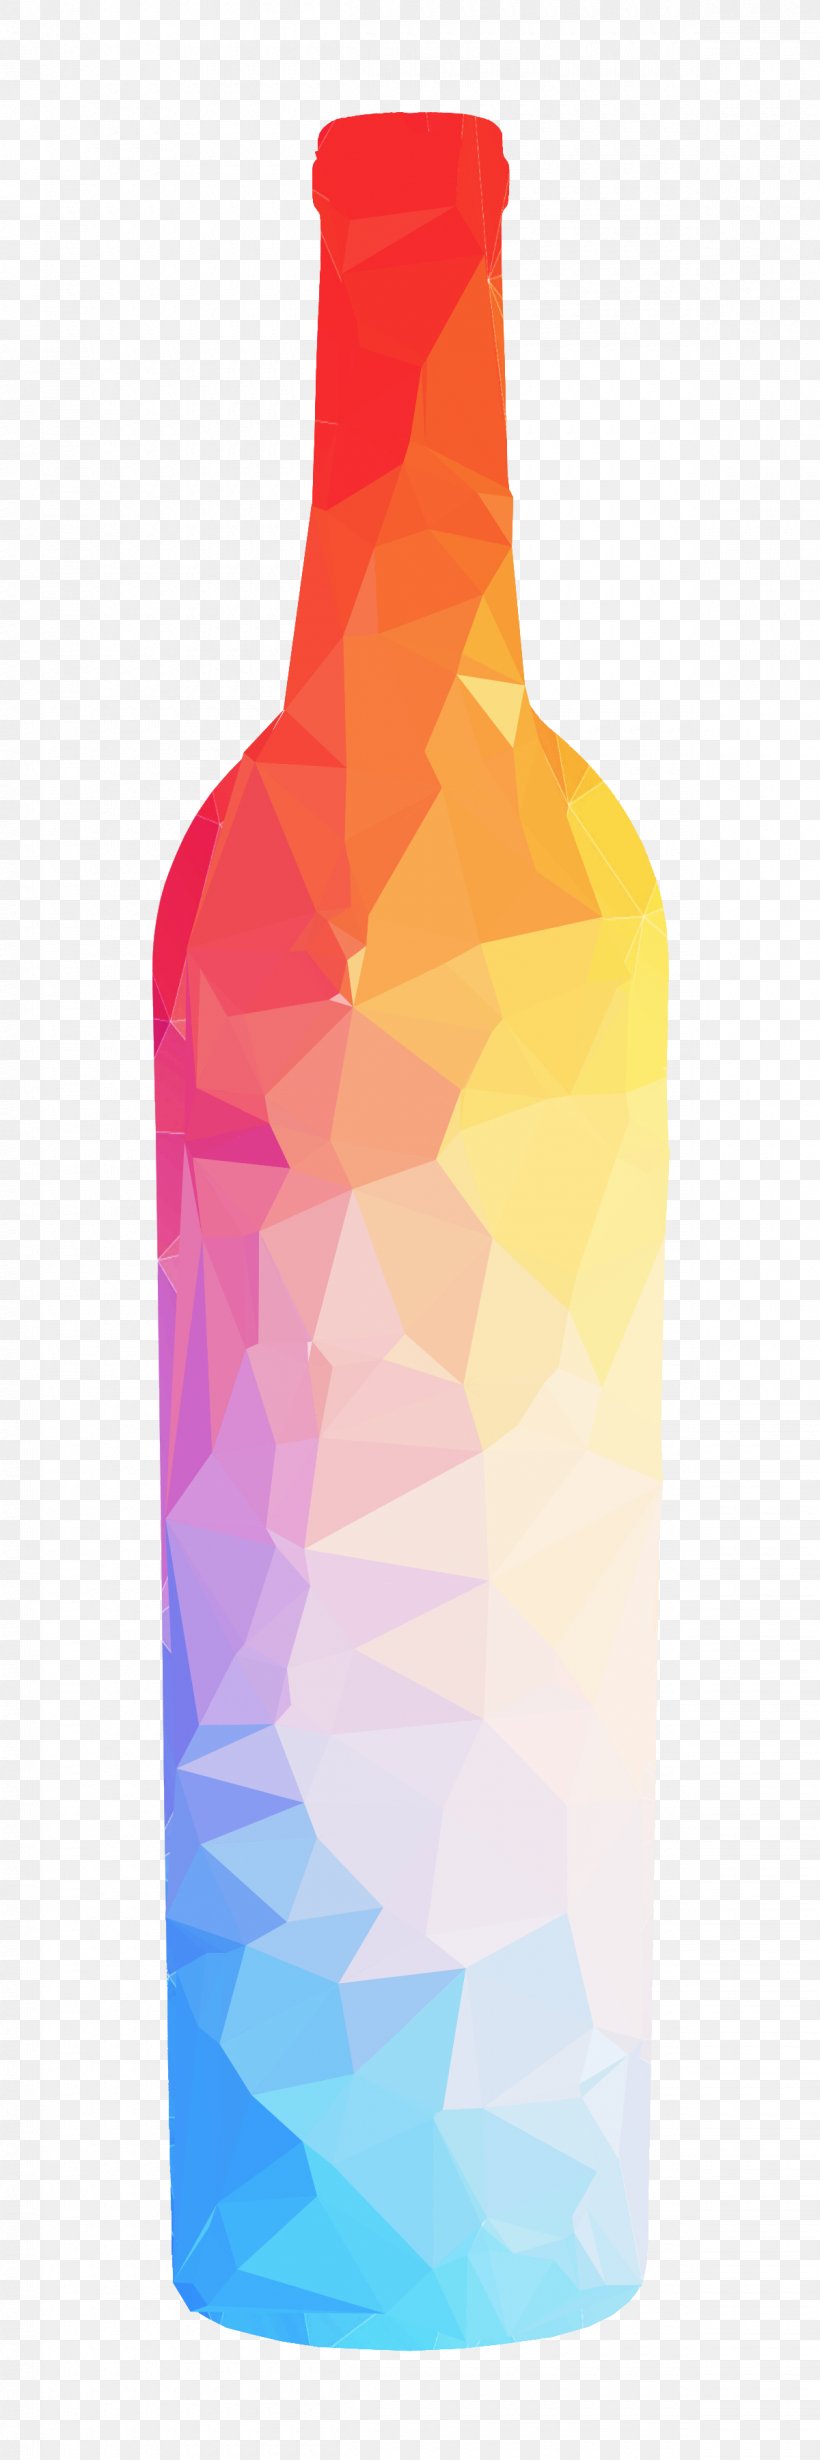 Water Bottles Wine Beer Glass Bottle, PNG, 1200x3600px, Water Bottles, Beer, Beer Bottle, Bottle, Drinkware Download Free